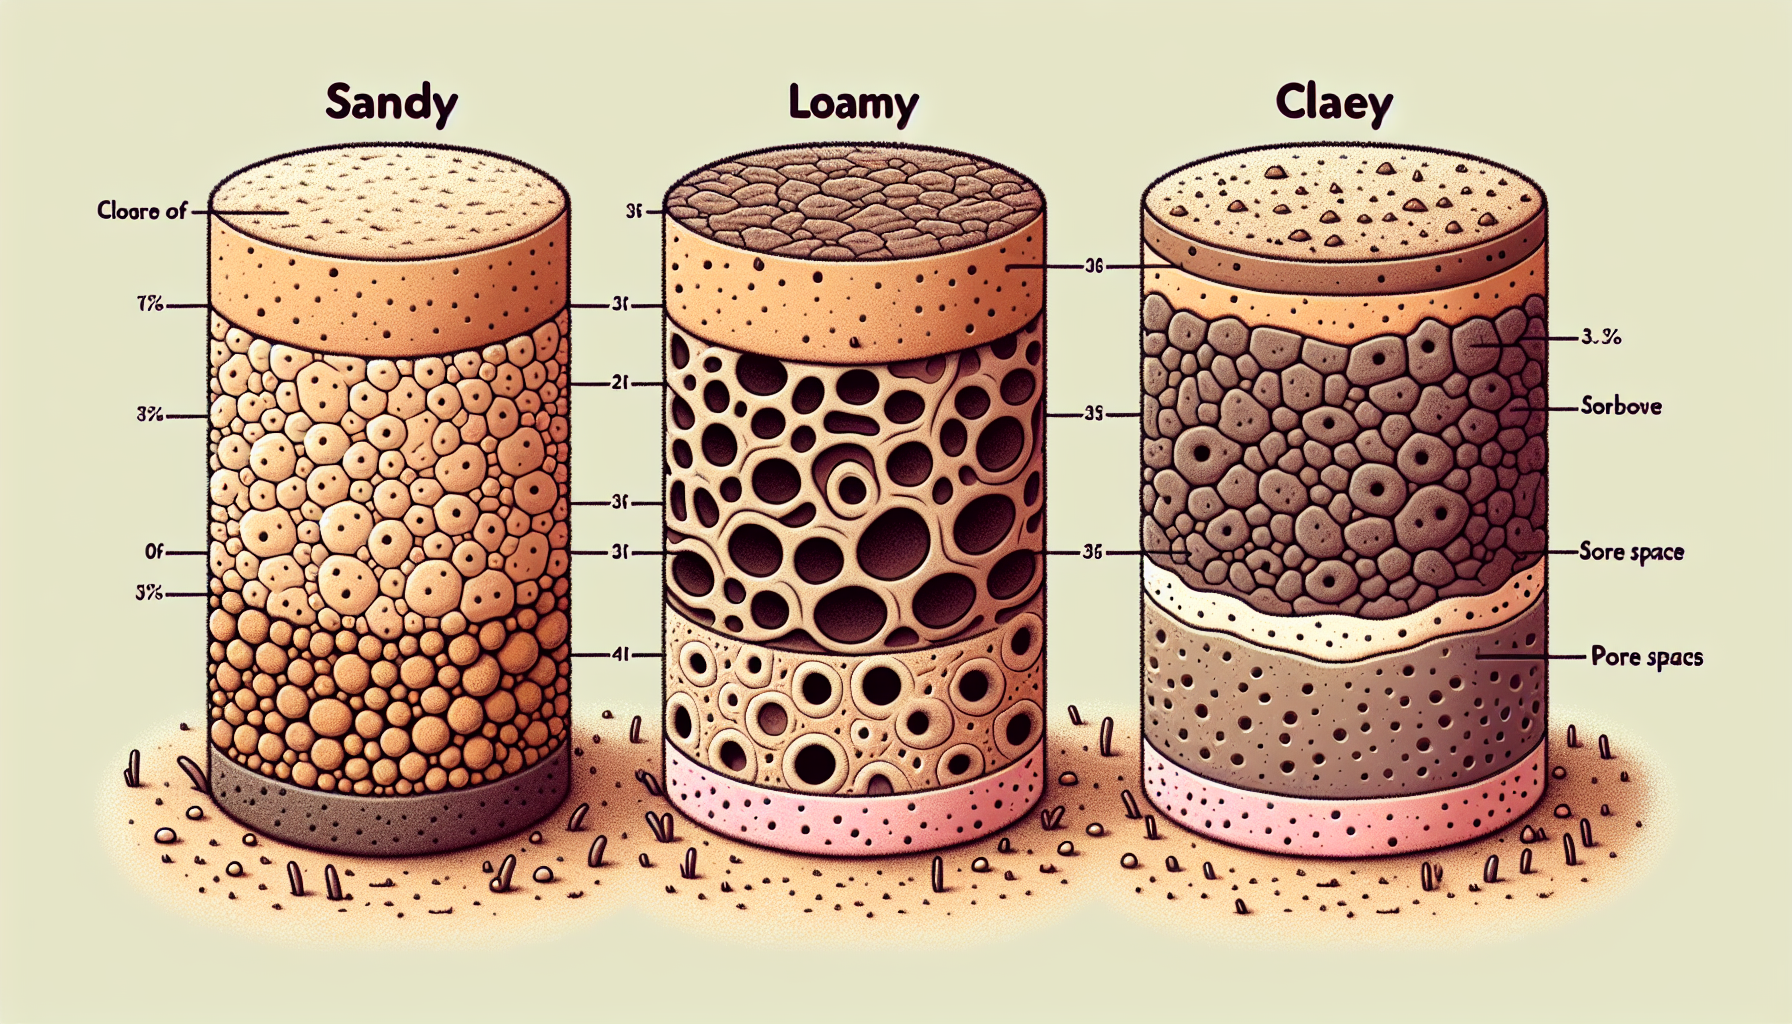 Comparison of soil textures - sandy, loamy, and clayey